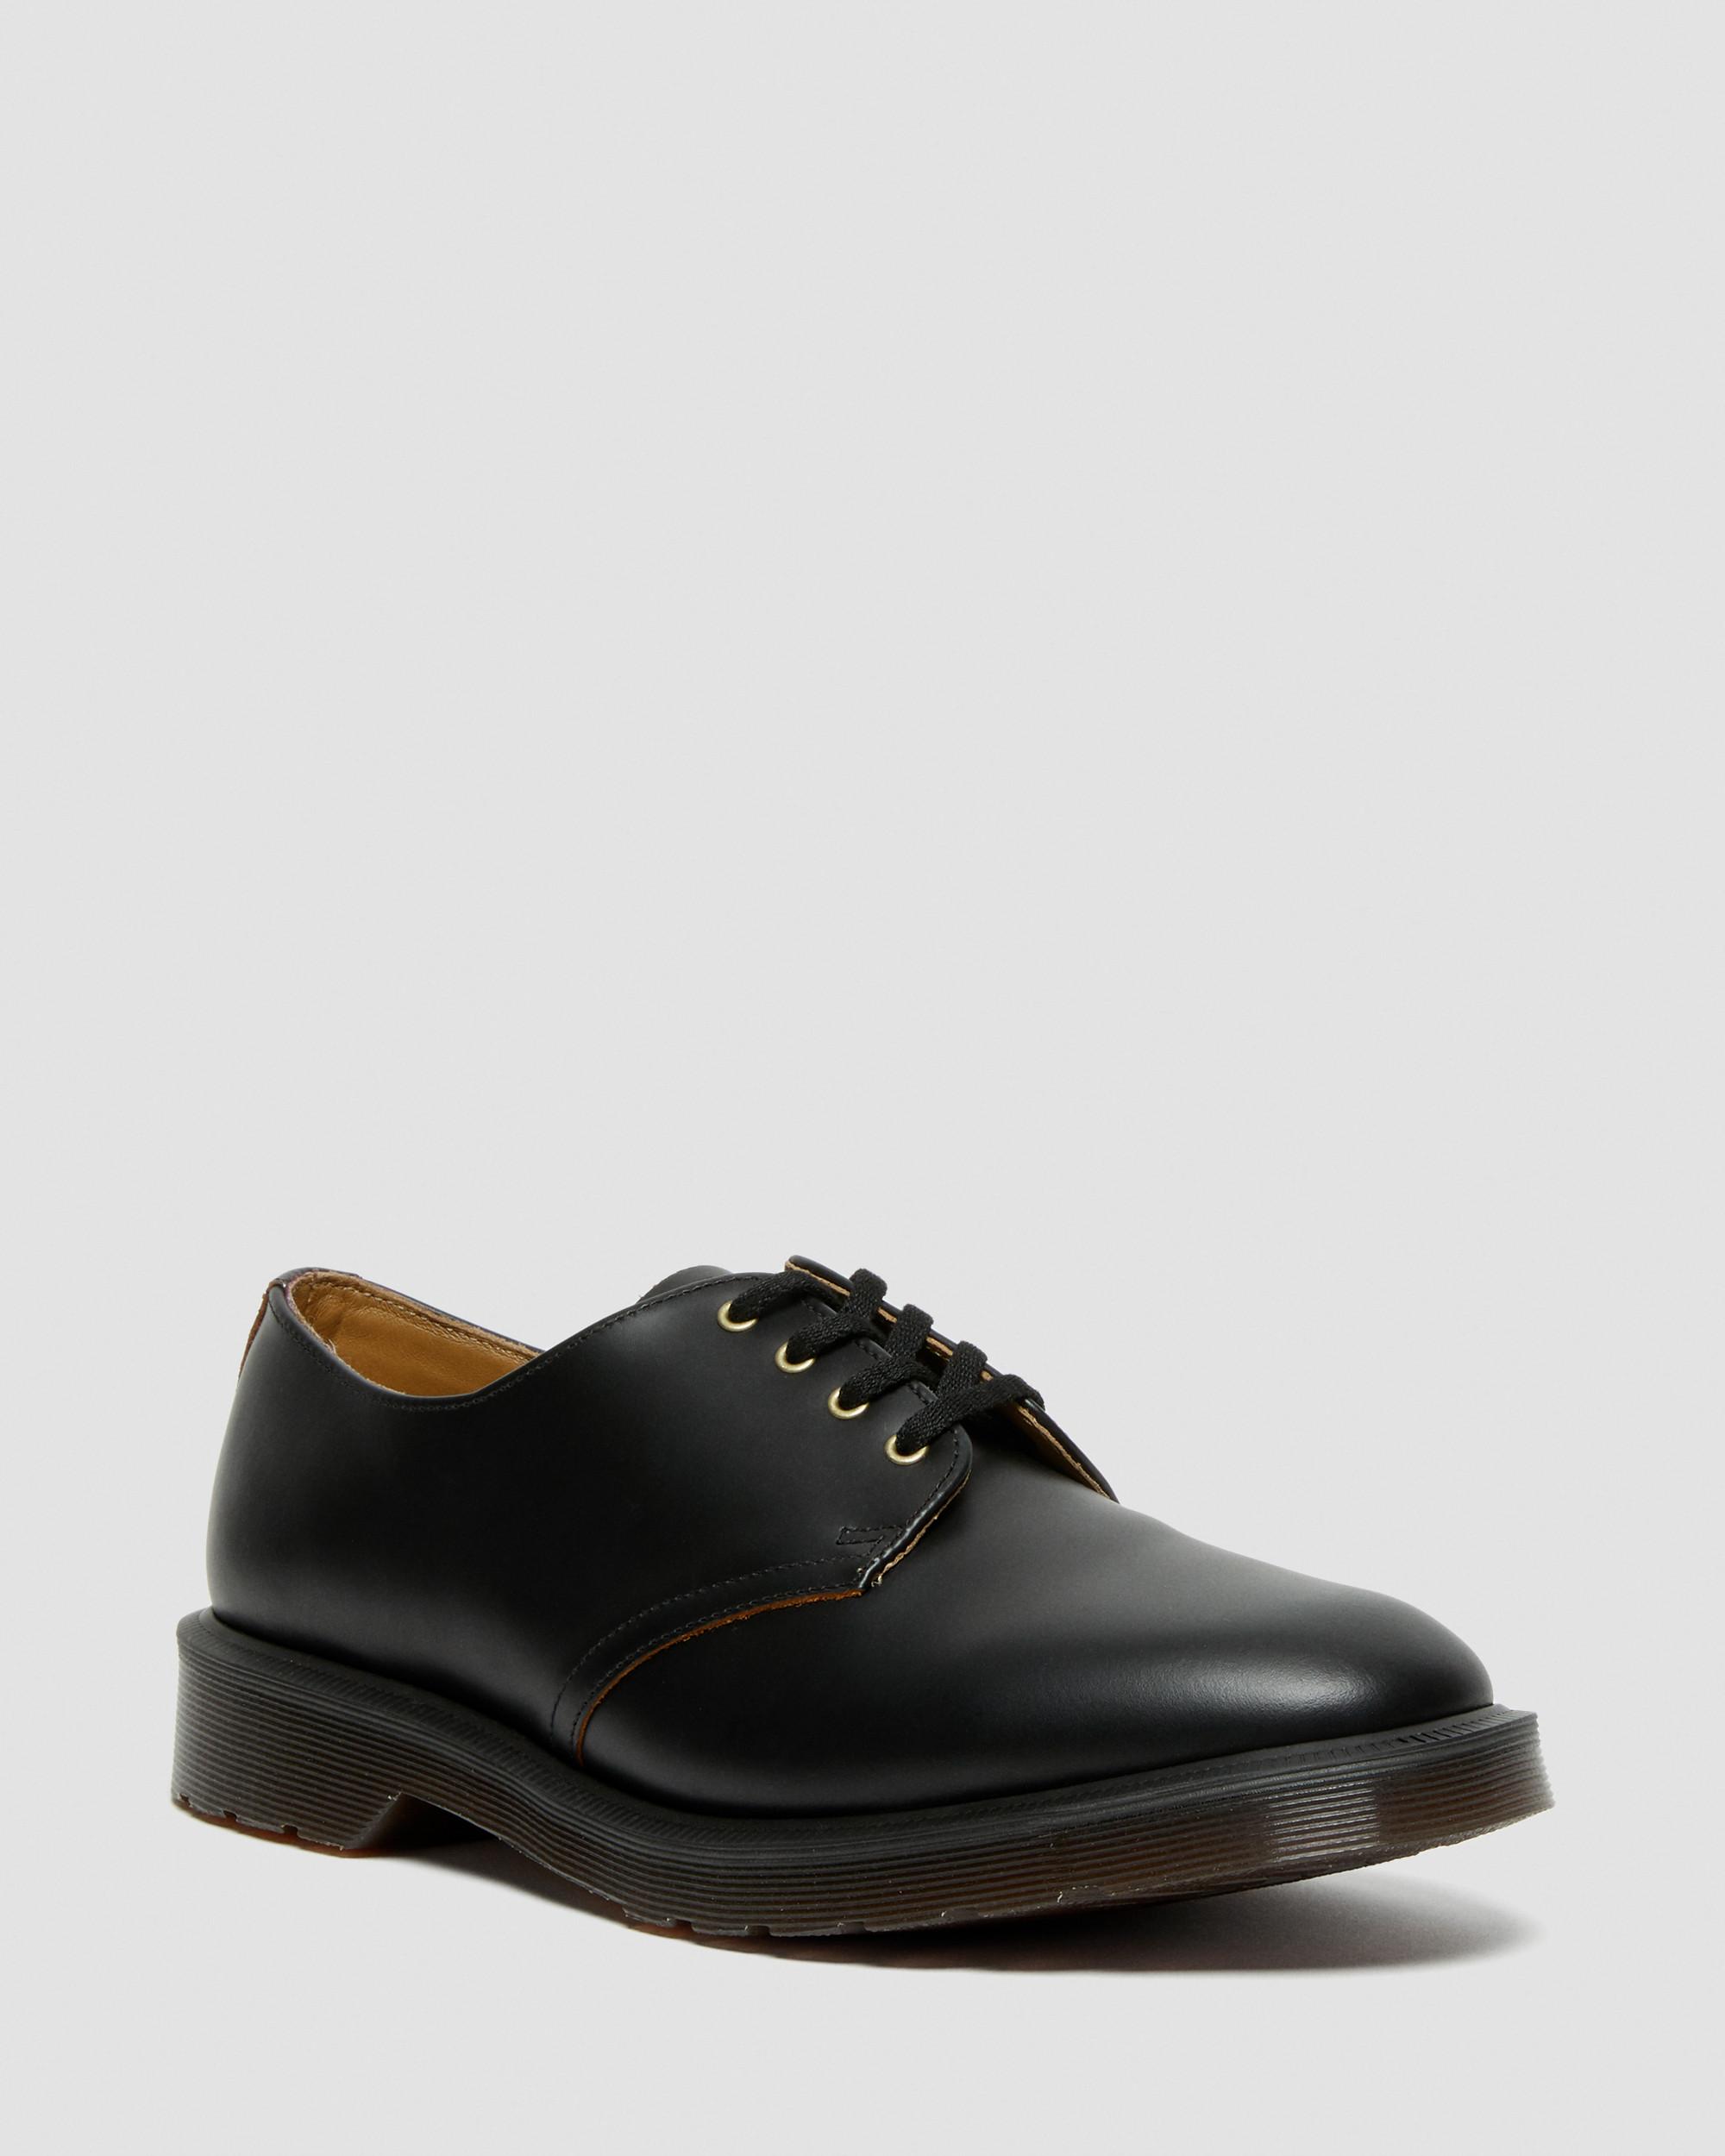 Smiths Archive Lace Up Shoes in Black | Dr. Martens